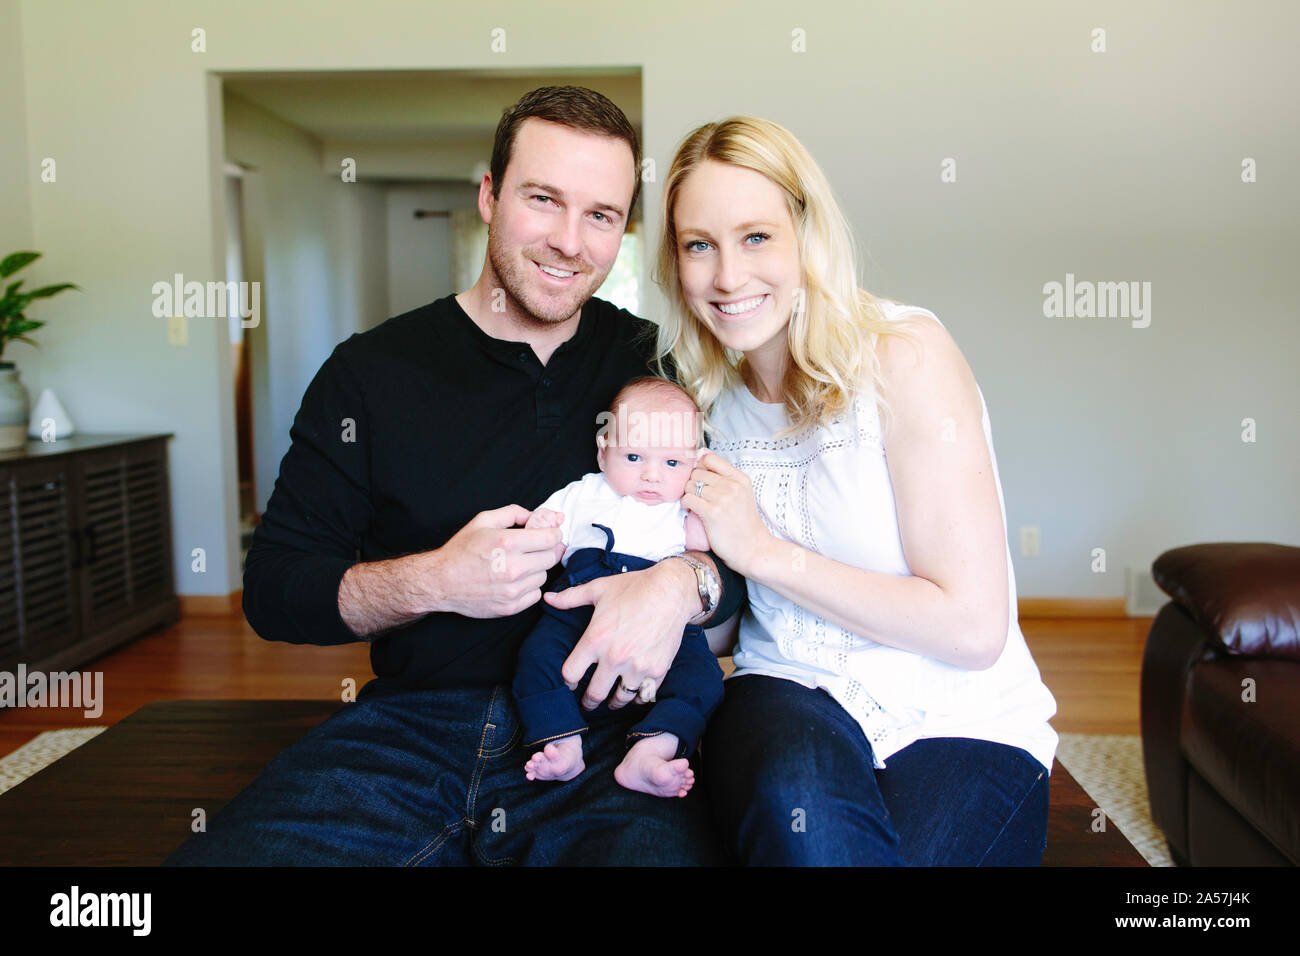 Family portrait of first time parents and their newborn son at home Stock Photo